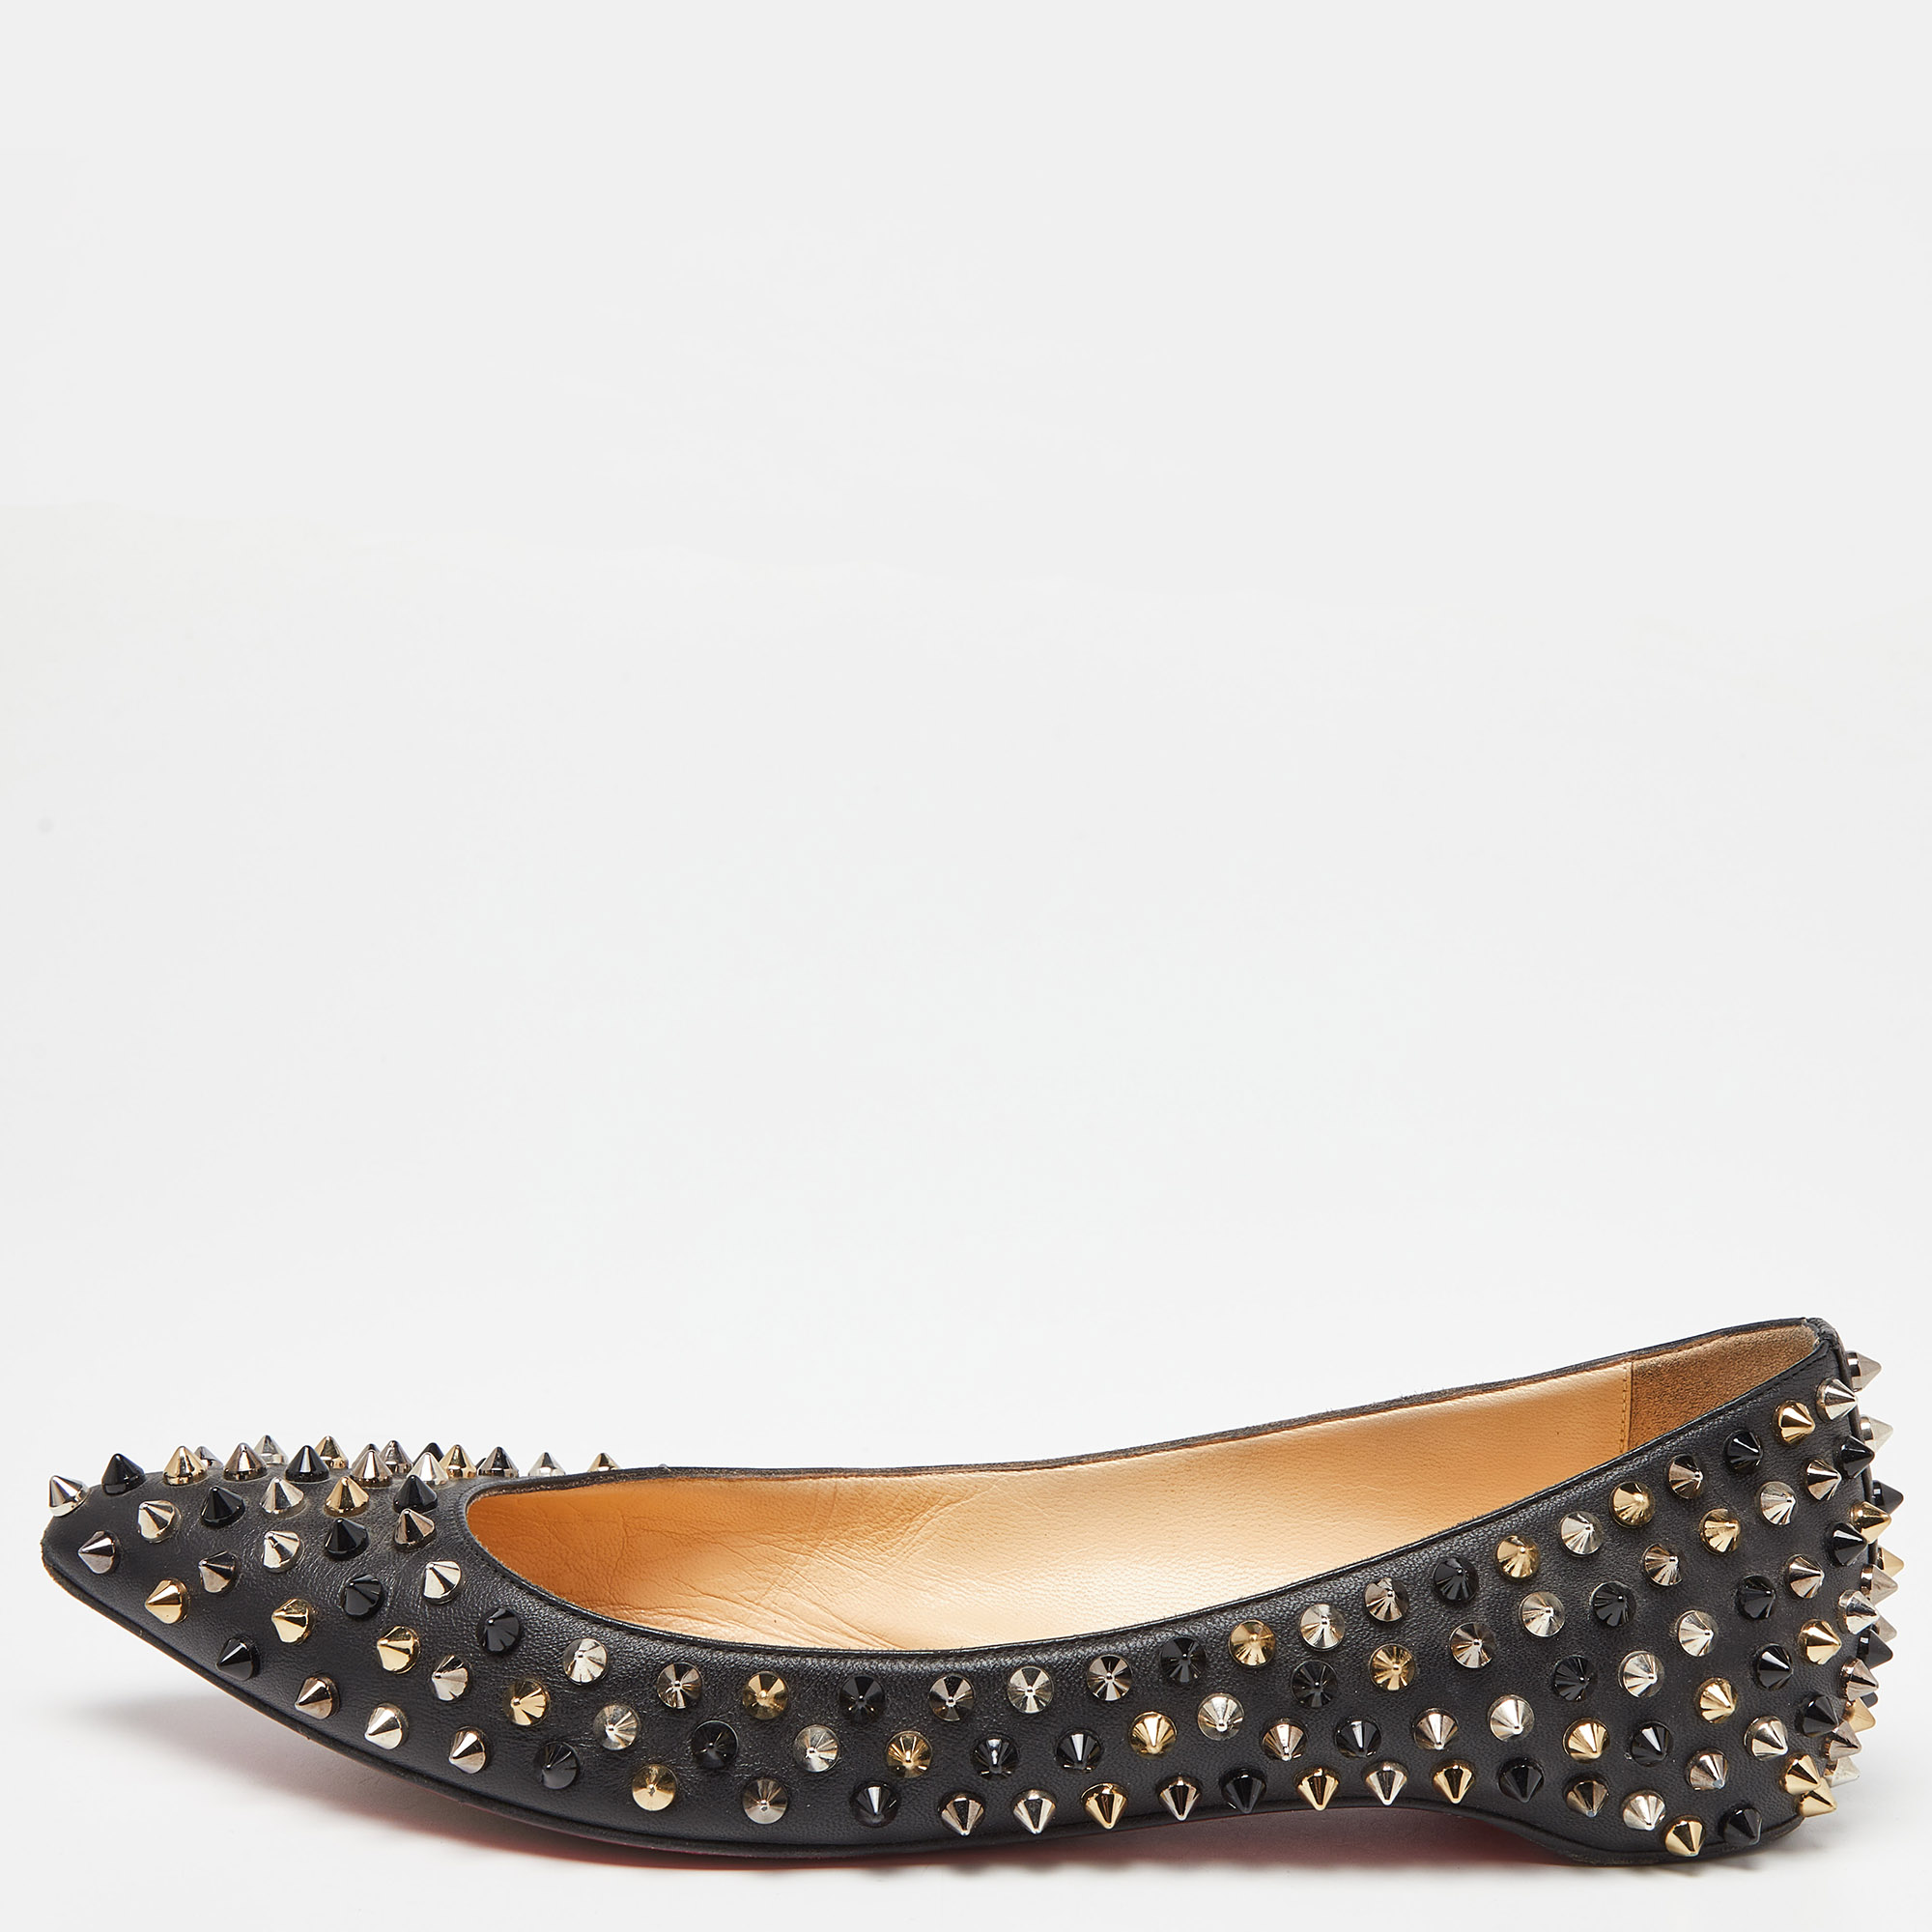 Pre-owned Christian Louboutin Black Patent Leather Pigalle Spikes Ballet Flats Size 39.5